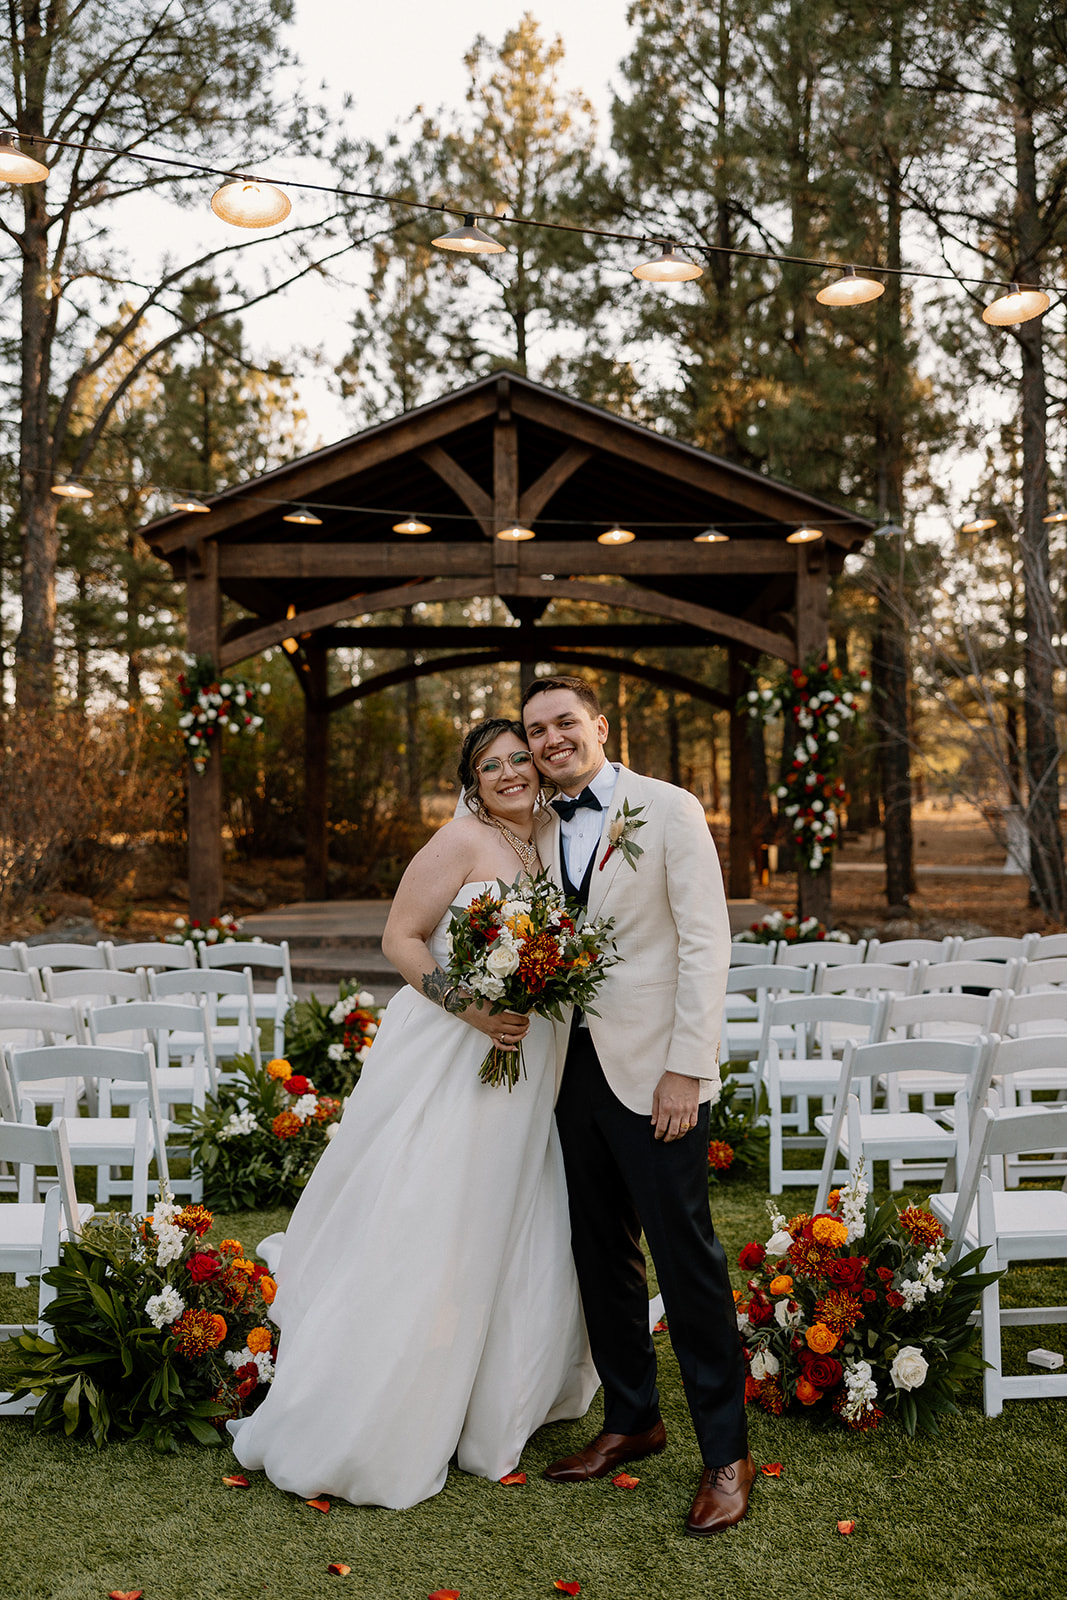 Stunning bride and groom pose together in front of their Arizona wedding venue